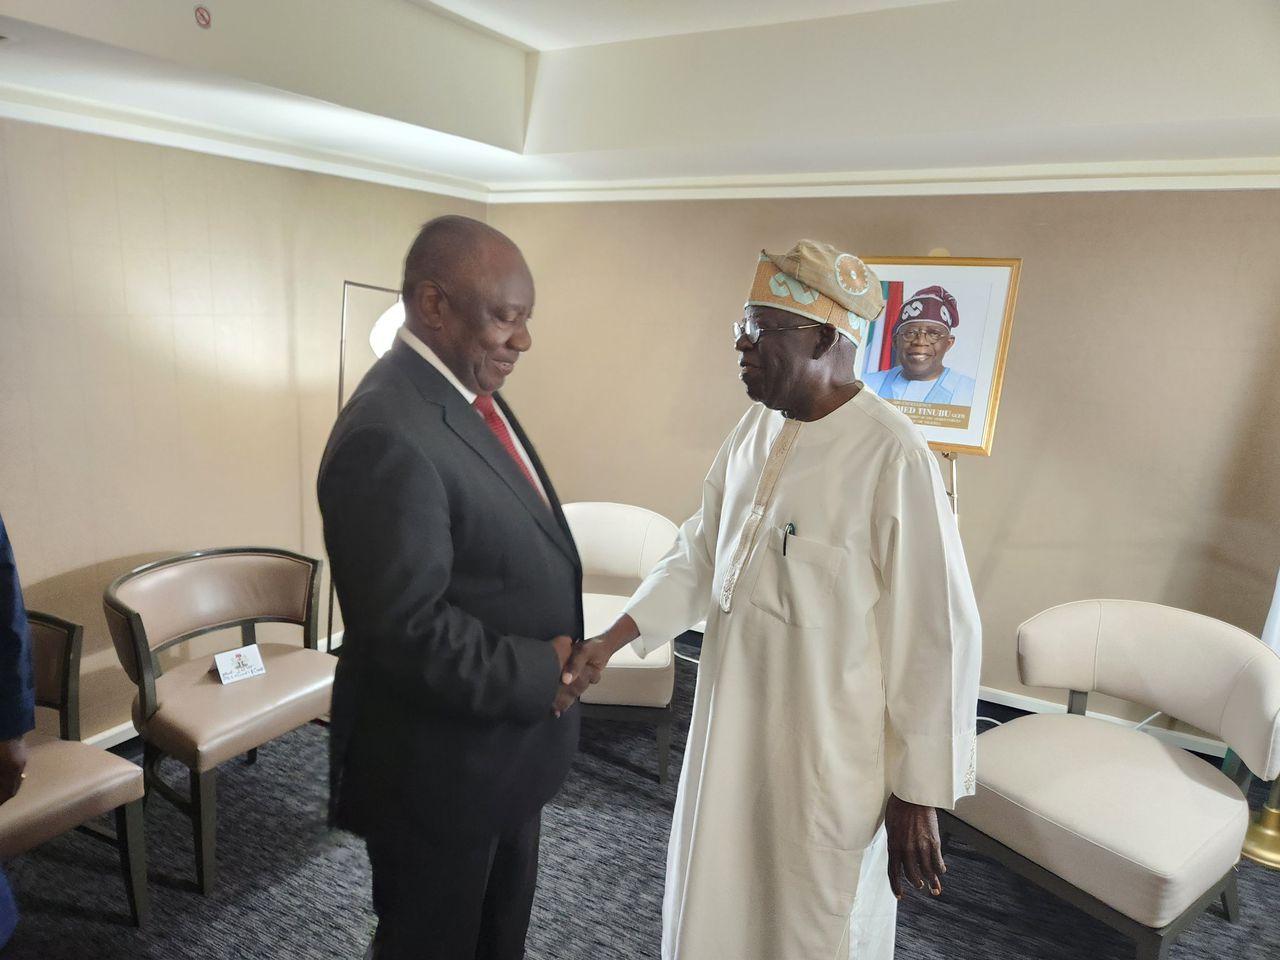 Tinubu holds ‘fruitful’ talk with South Africa president, Ramaphosa in New York